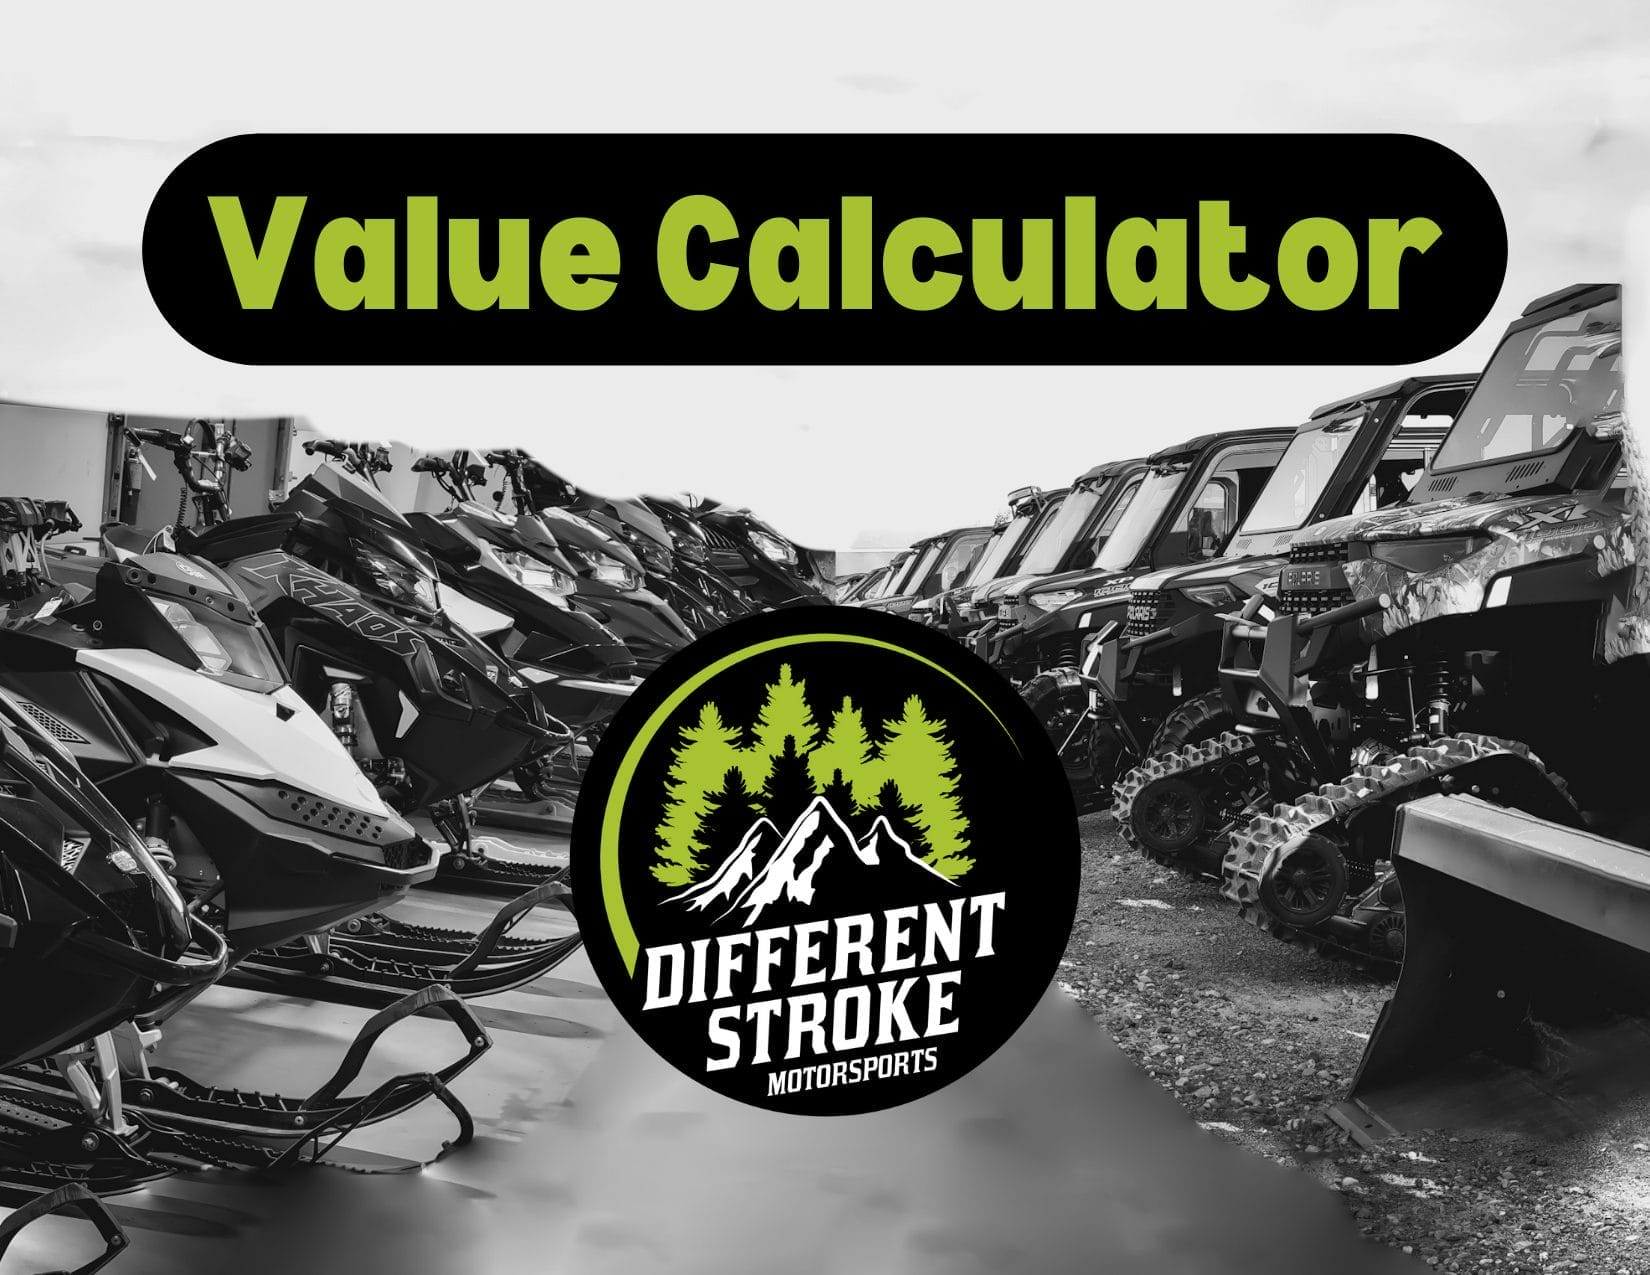 How much is my (ATV, UTV, Motorcycle, ect.) worth? – A guide about depreciation and resale value